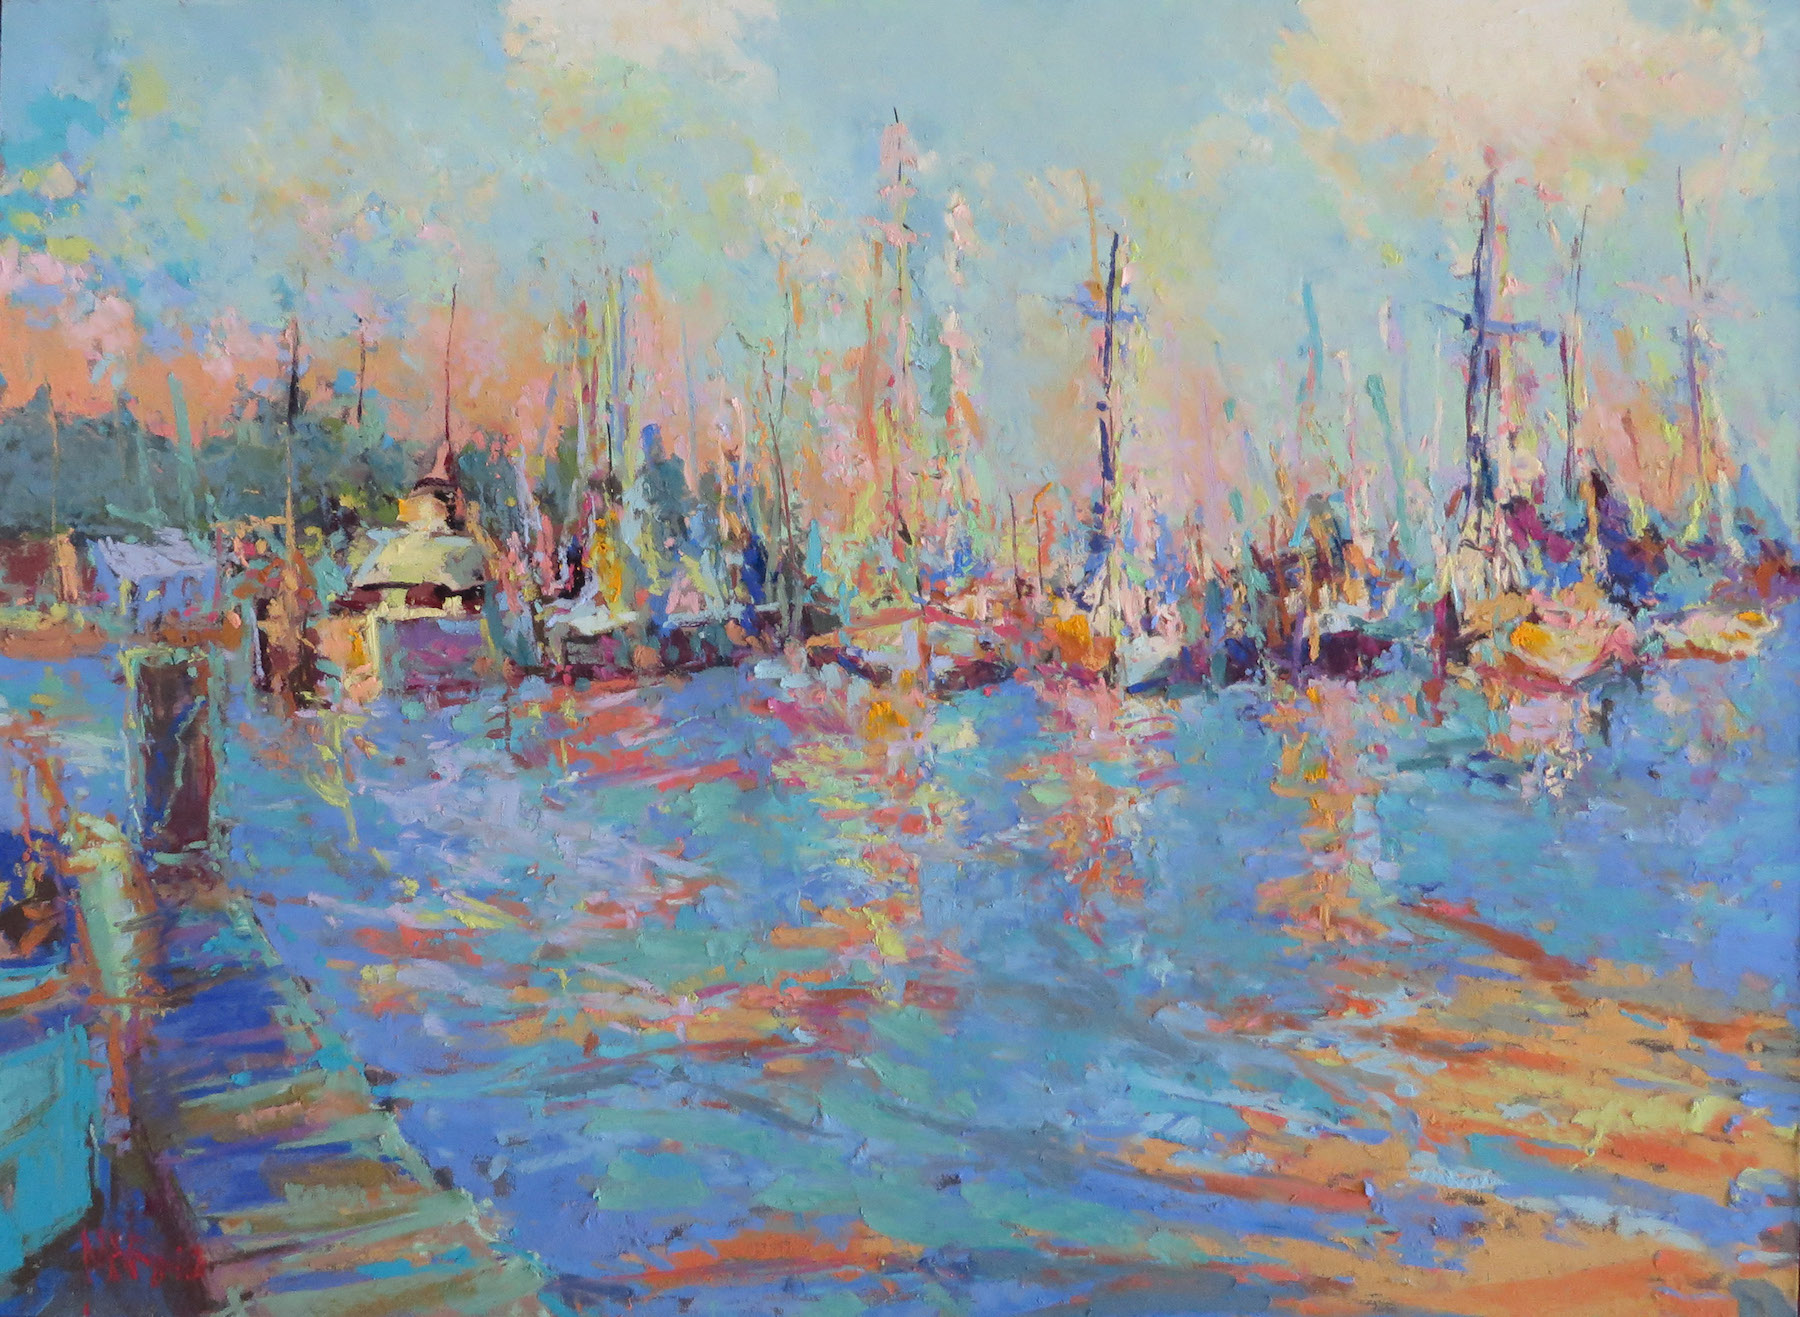 Maria Marino, Mear Marina-Eastport," pastel over watercolor on UART 320 board, 12 x 16 in. Sold. Studio painting of a boatyard in Eastport, MD.